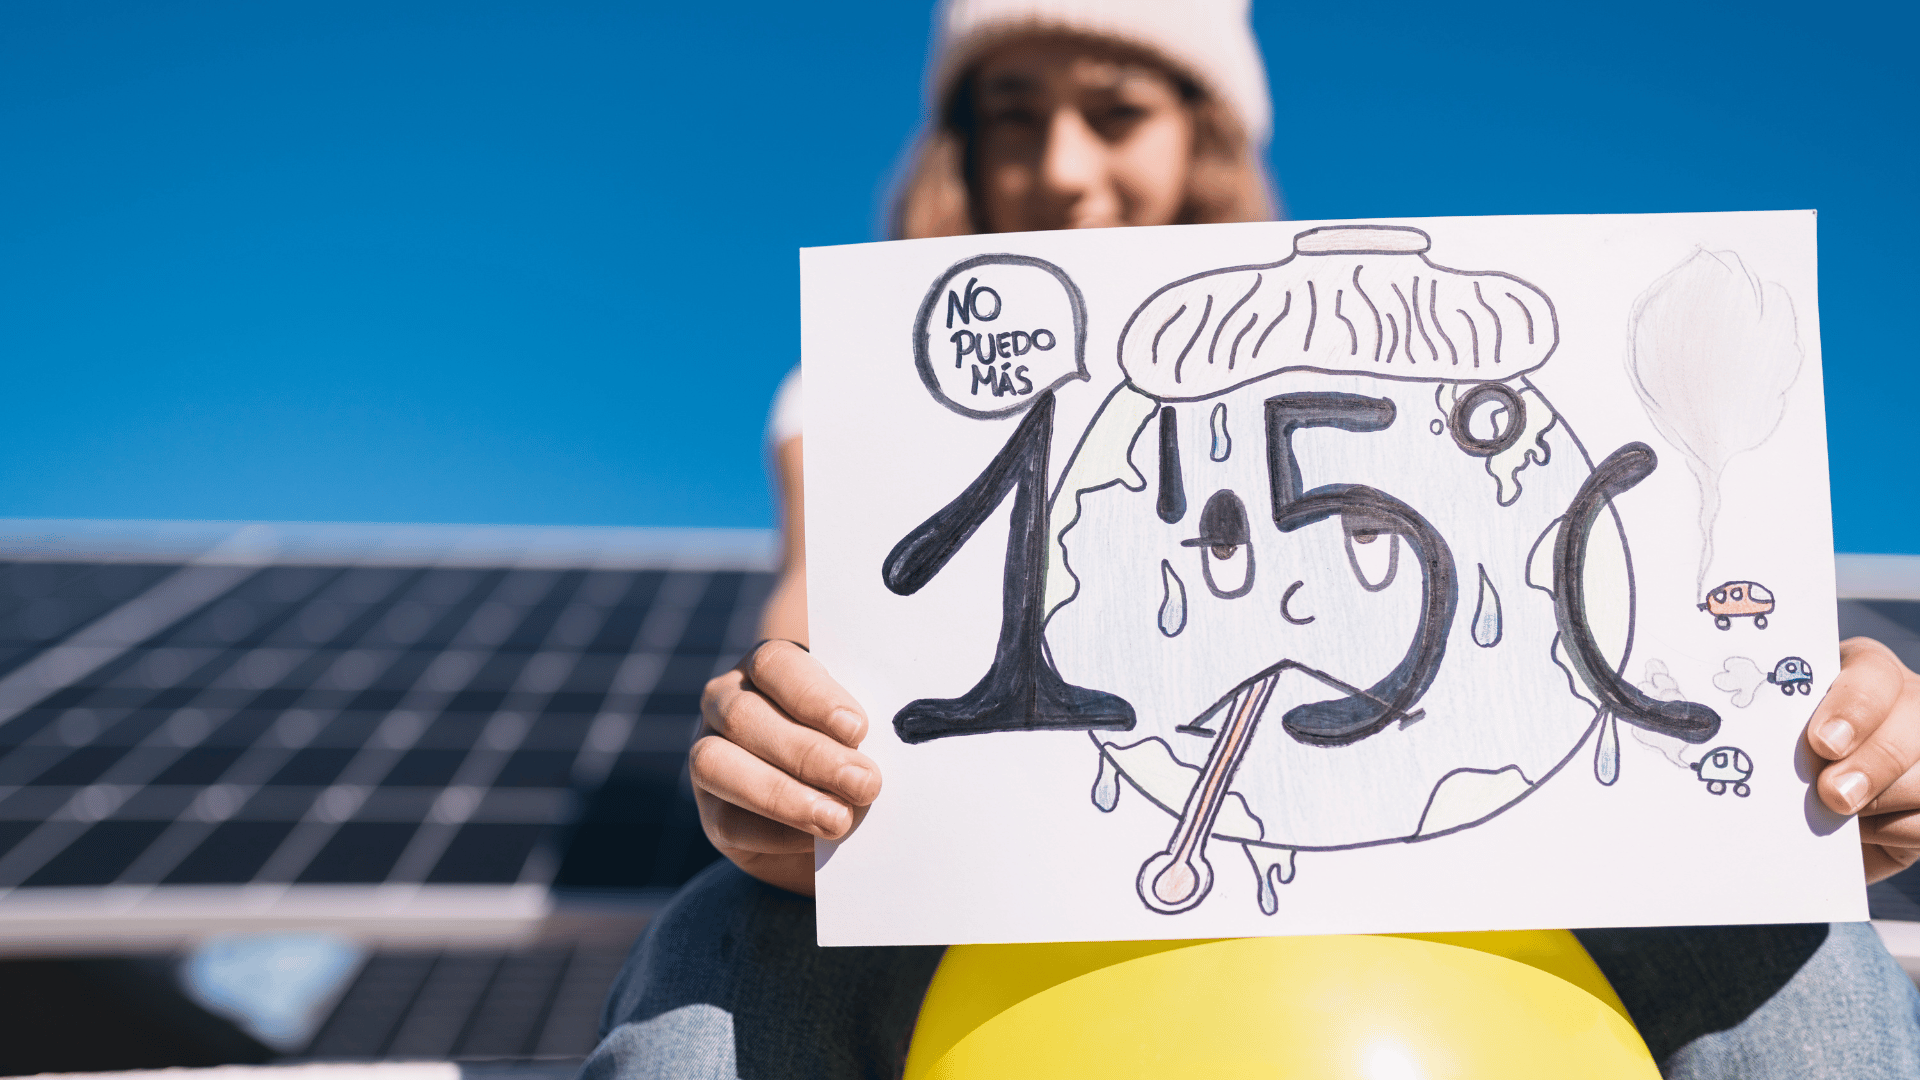 a woman is holding a sign in front of a solar panel .